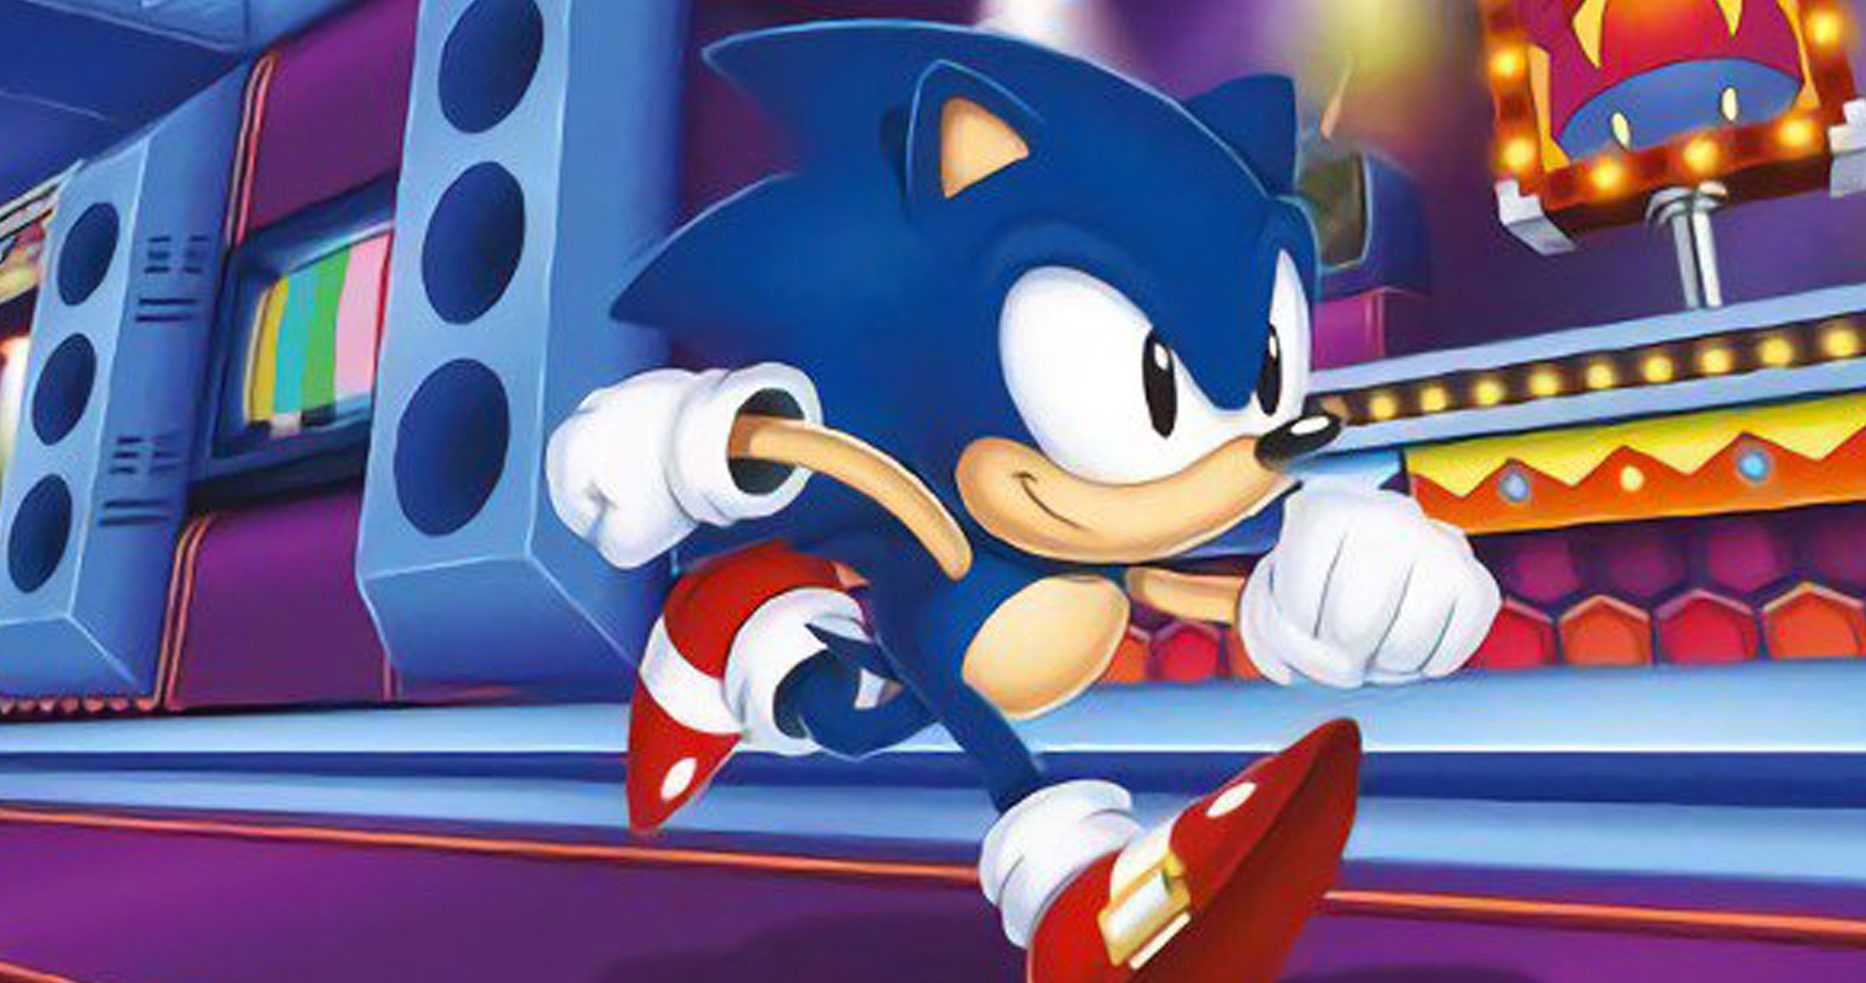 Sonic Mania Plus On The Switch Is The HighestRated Sonic Game In 25 Years  Let That Sink In